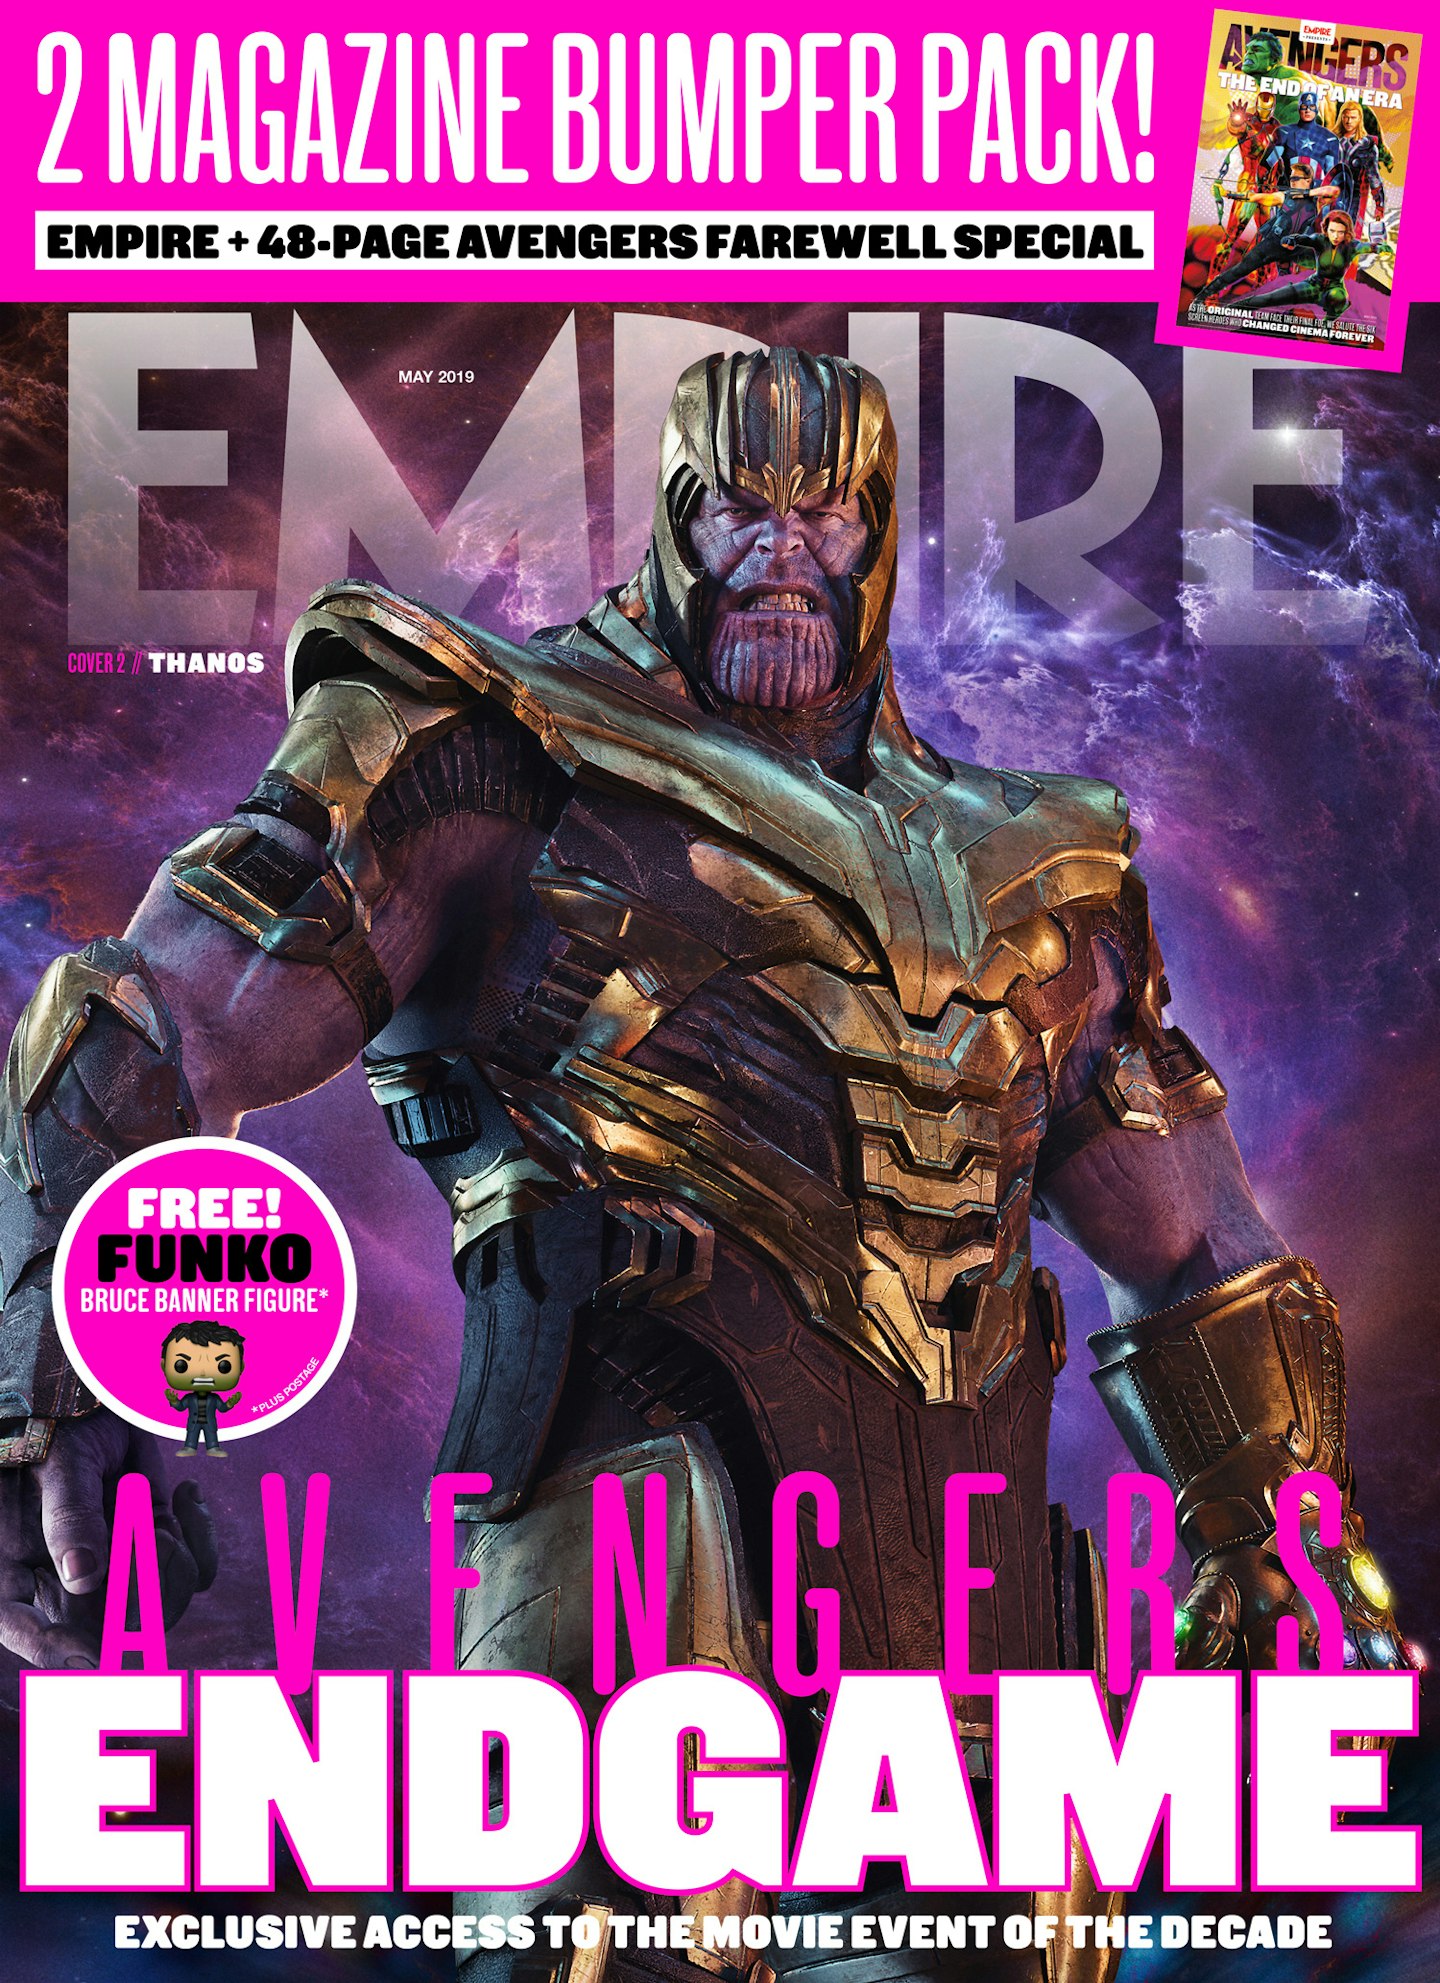 Empire - May 2019 - Avengers Endgame covers